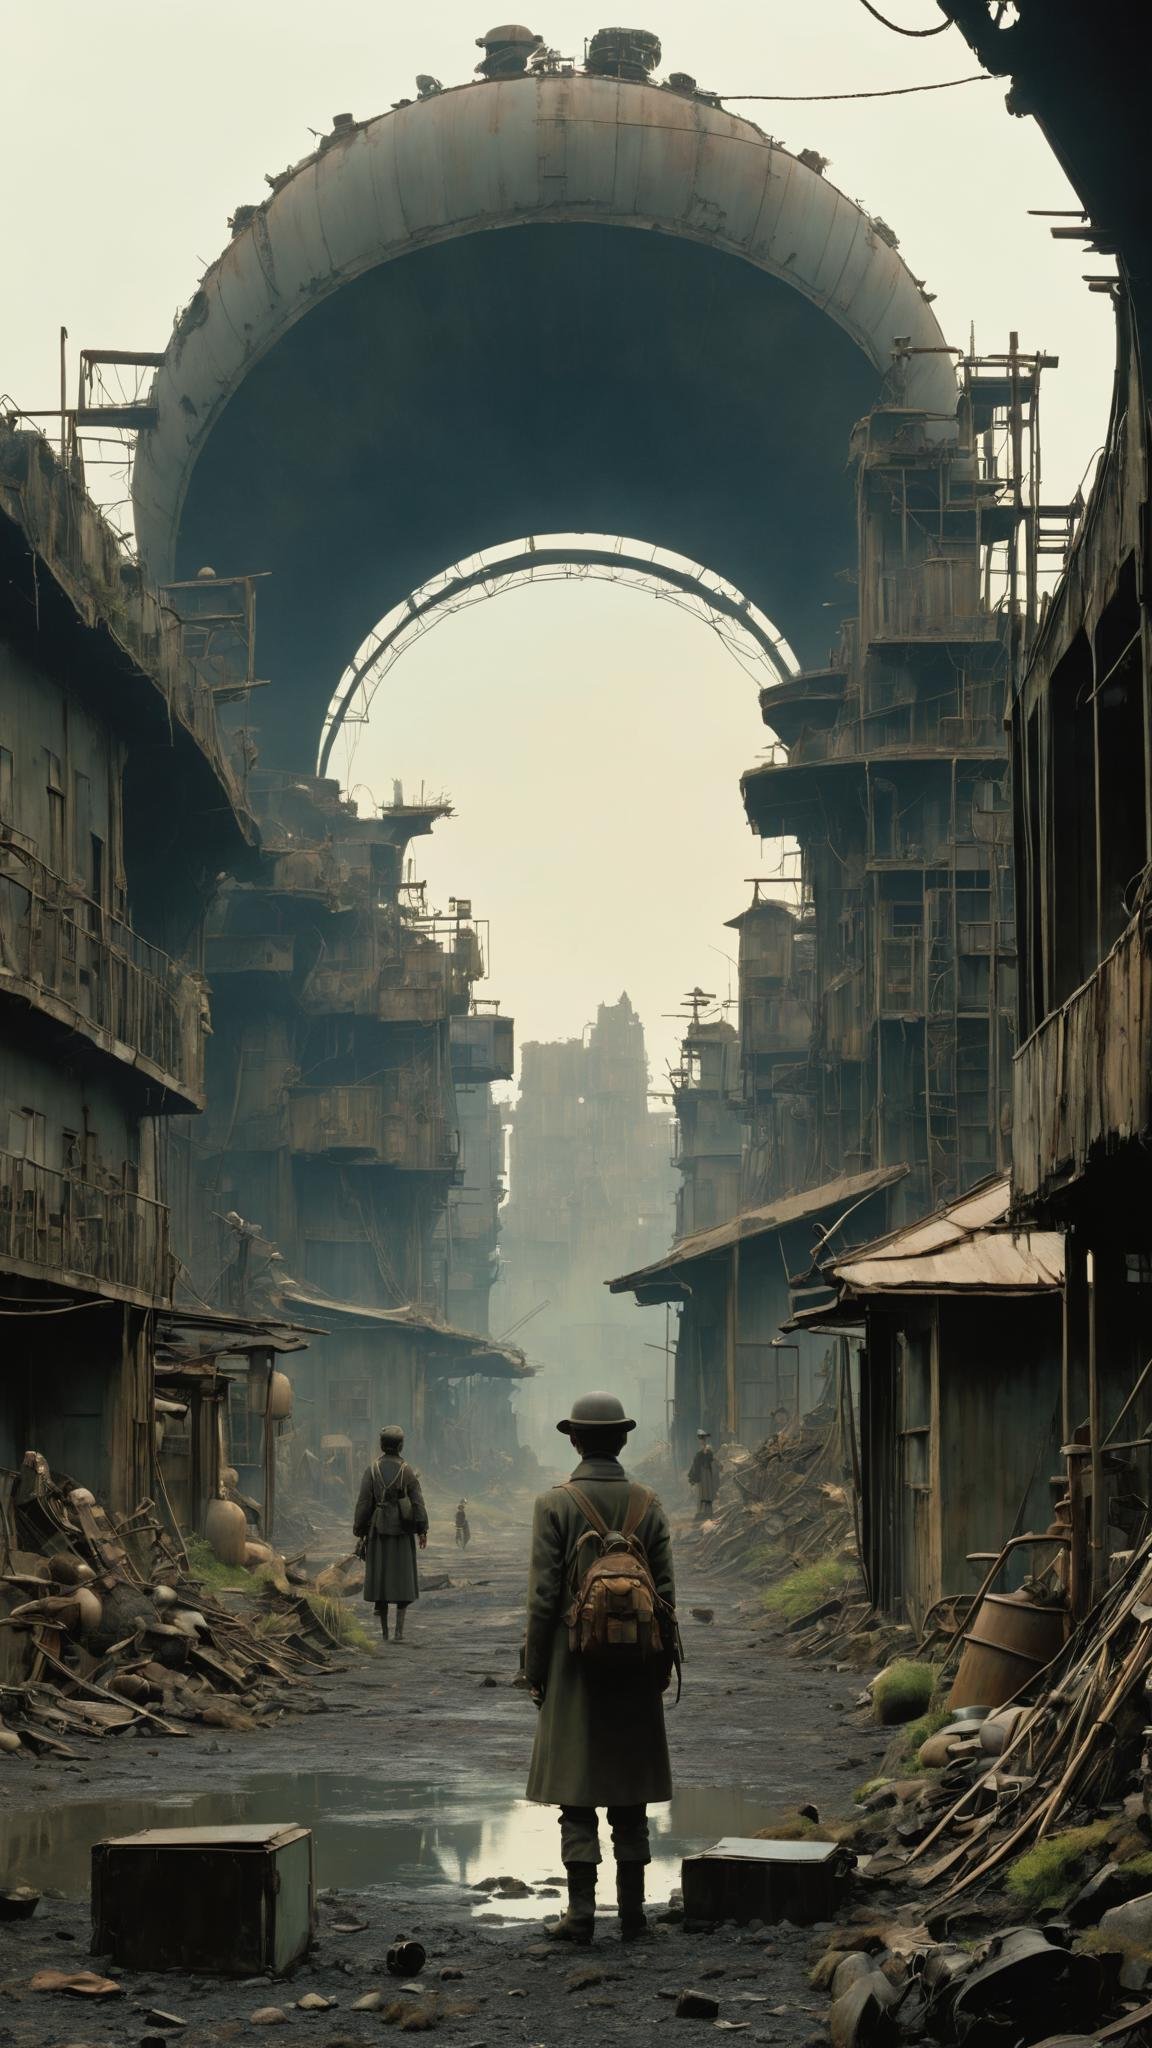 Post-apocalyptic wasteland, salvaged artifacts repurposed into art installations, survivors creating beauty amid desolation. , cinematic movie by Hayao Miyazaki , Roger Deakins